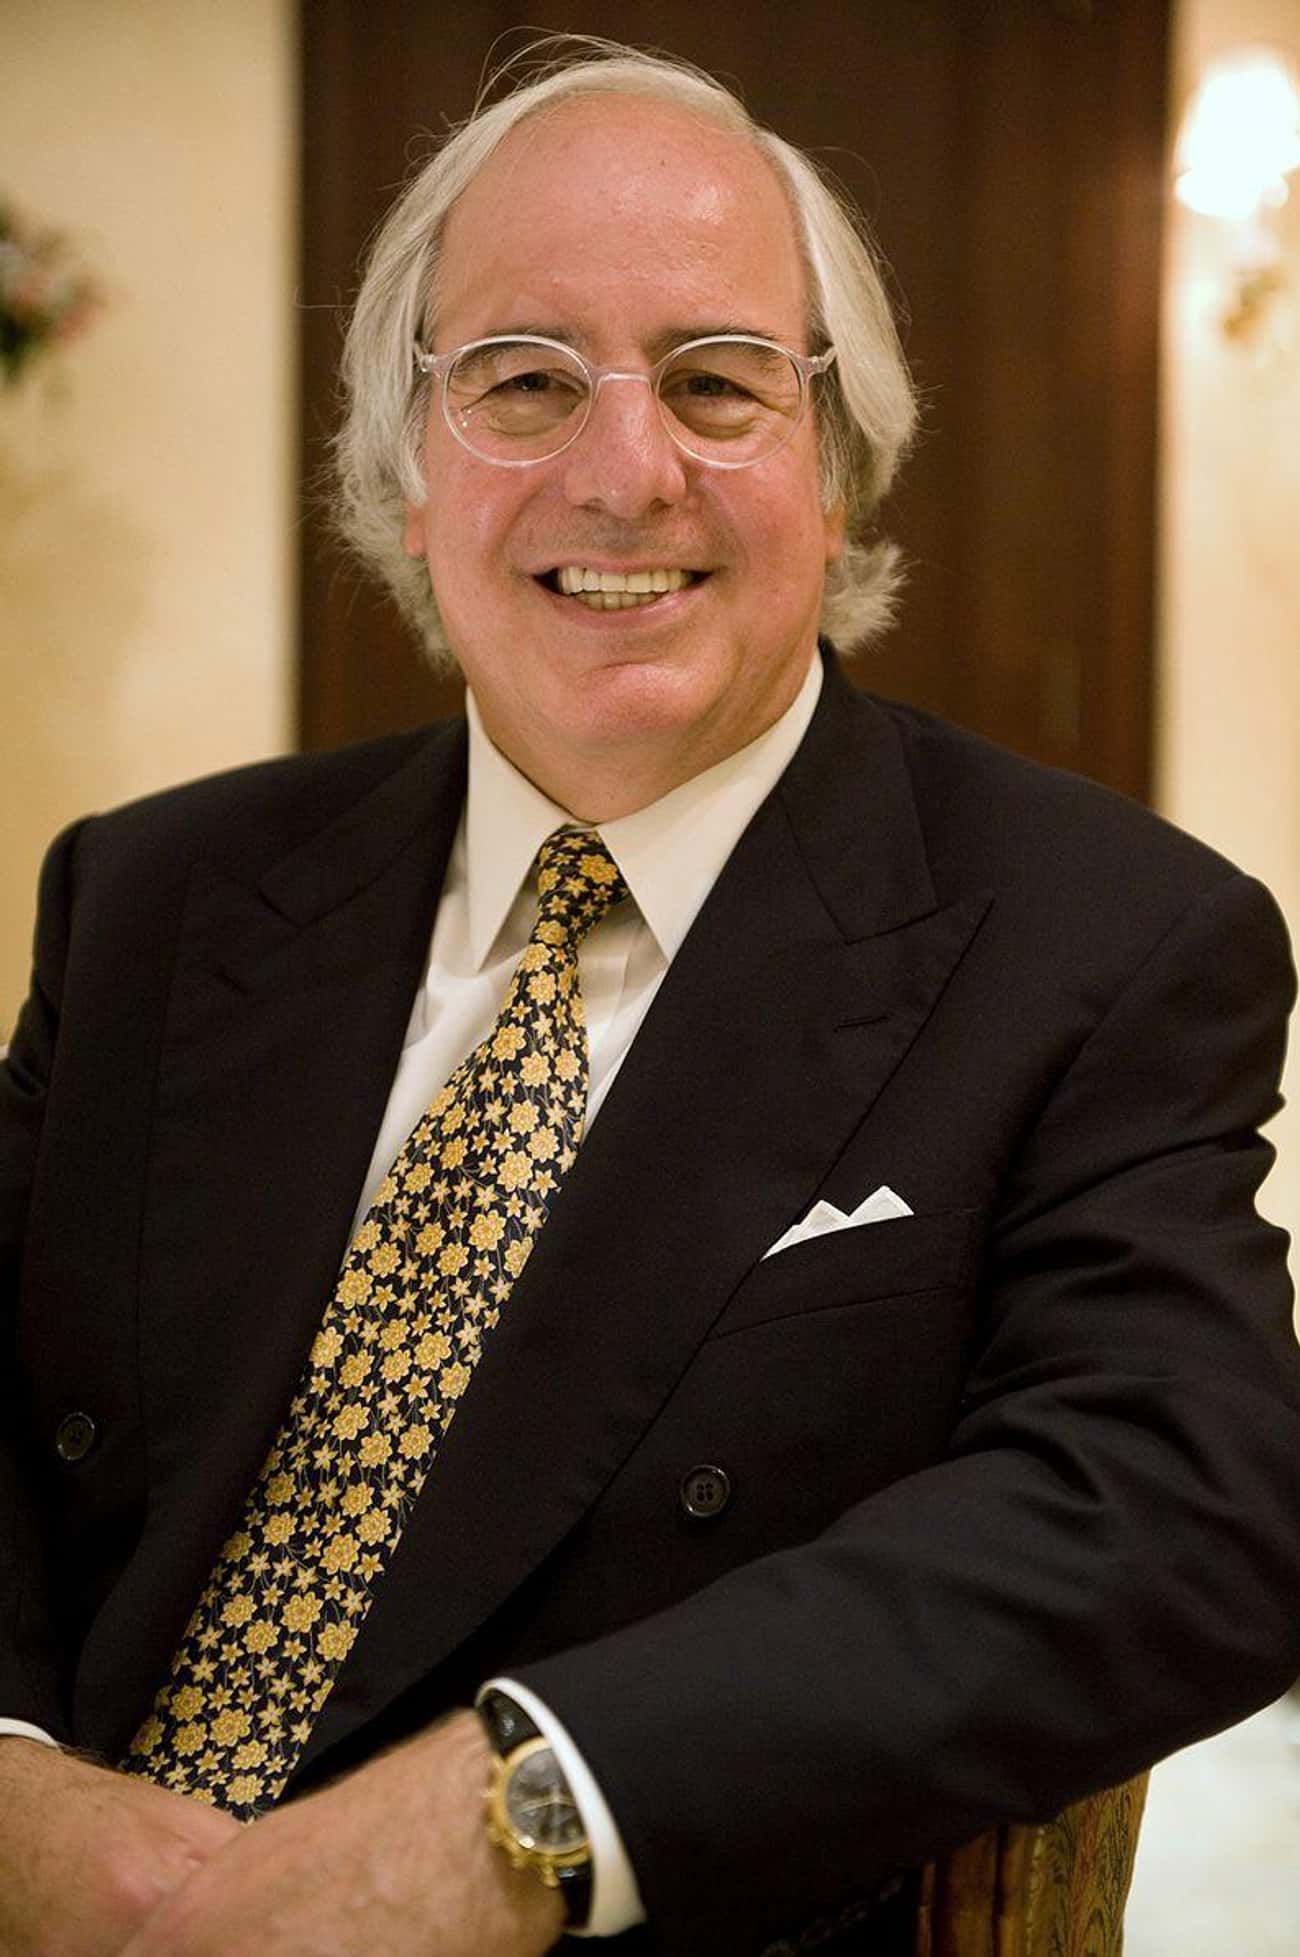 Frank Abagnale Jr. Said He Impersonated A Doctor, A Pilot, A Lawyer, And More